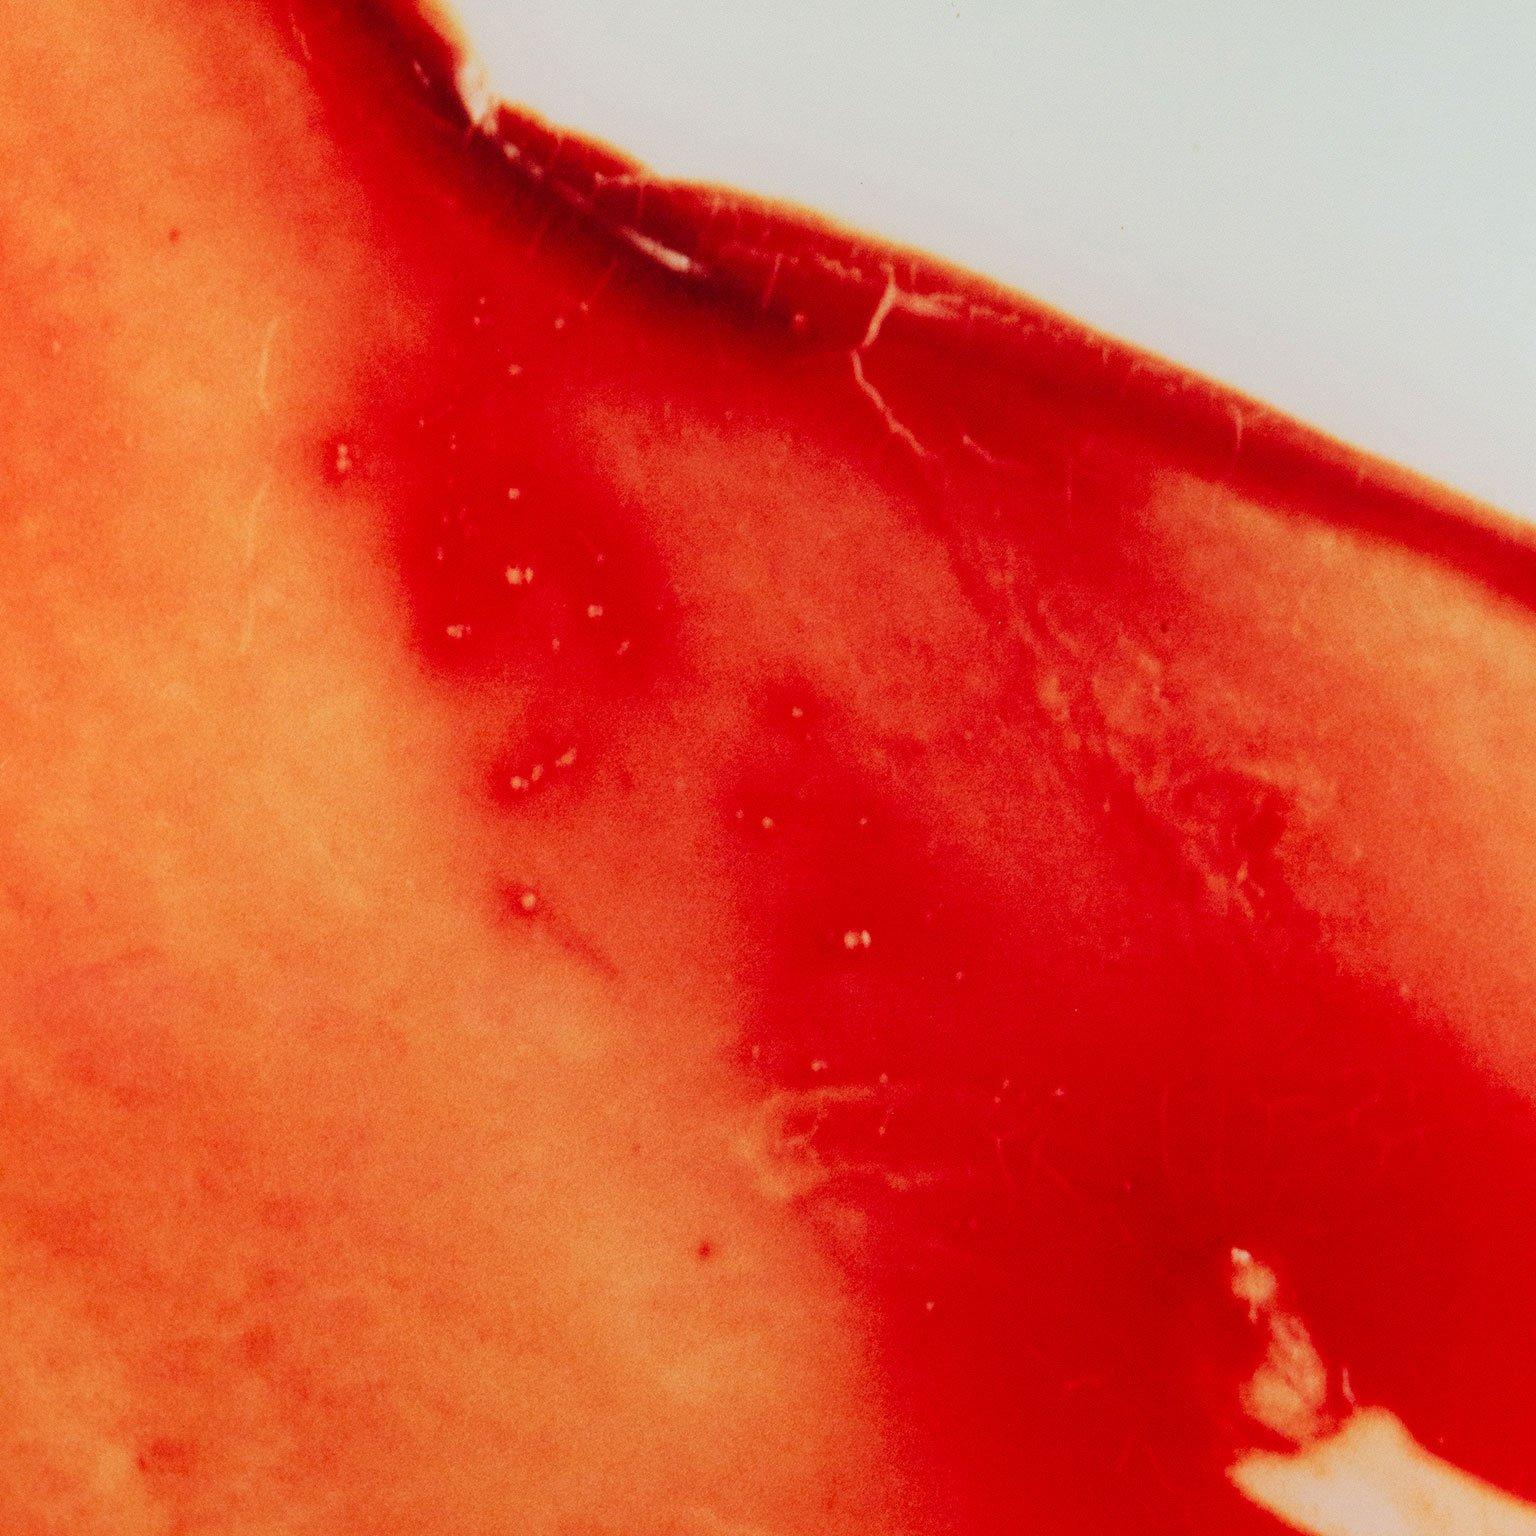 Blood + Semen V - Beige Abstract Photograph by Andres Serrano